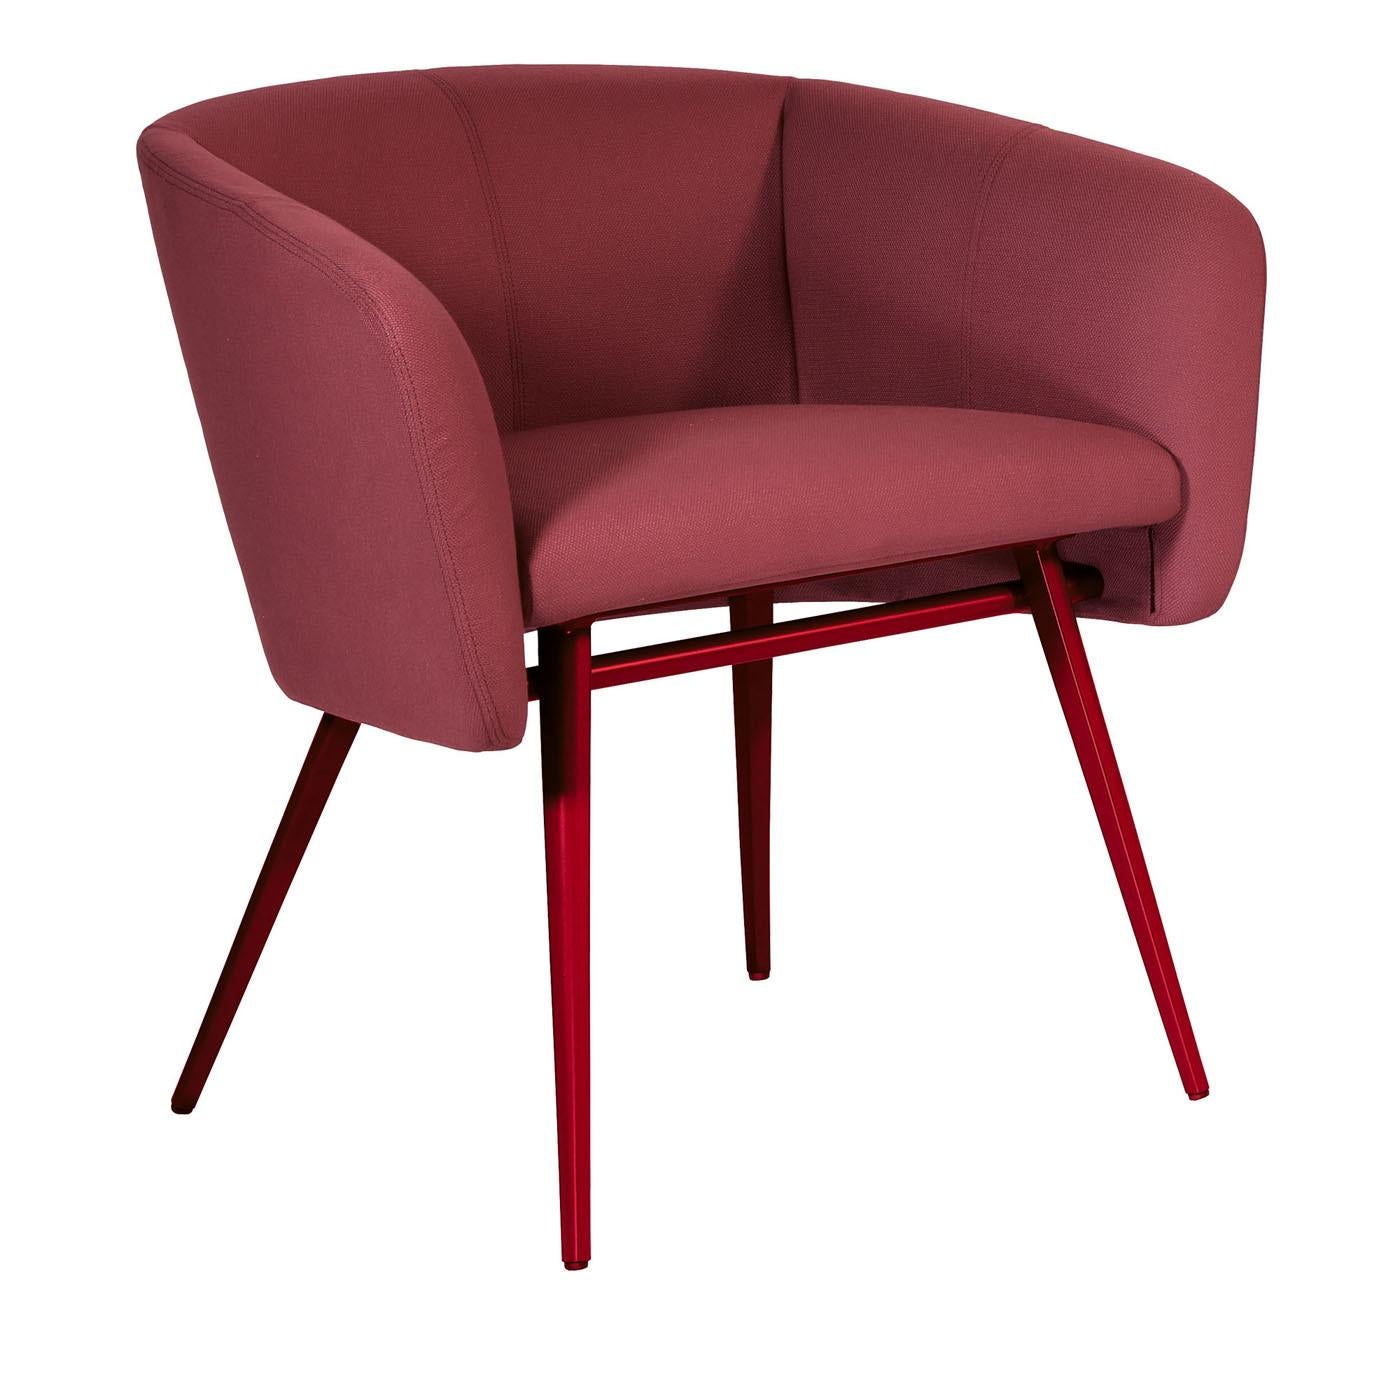 This chair has an elegant and comfortable allure, thanks to its welcoming and generous silhouette and its sophisticated burgundy hue. Reminiscent of the traditional tub chair, it features a superb structure in beechwood with slanted legs boasting a